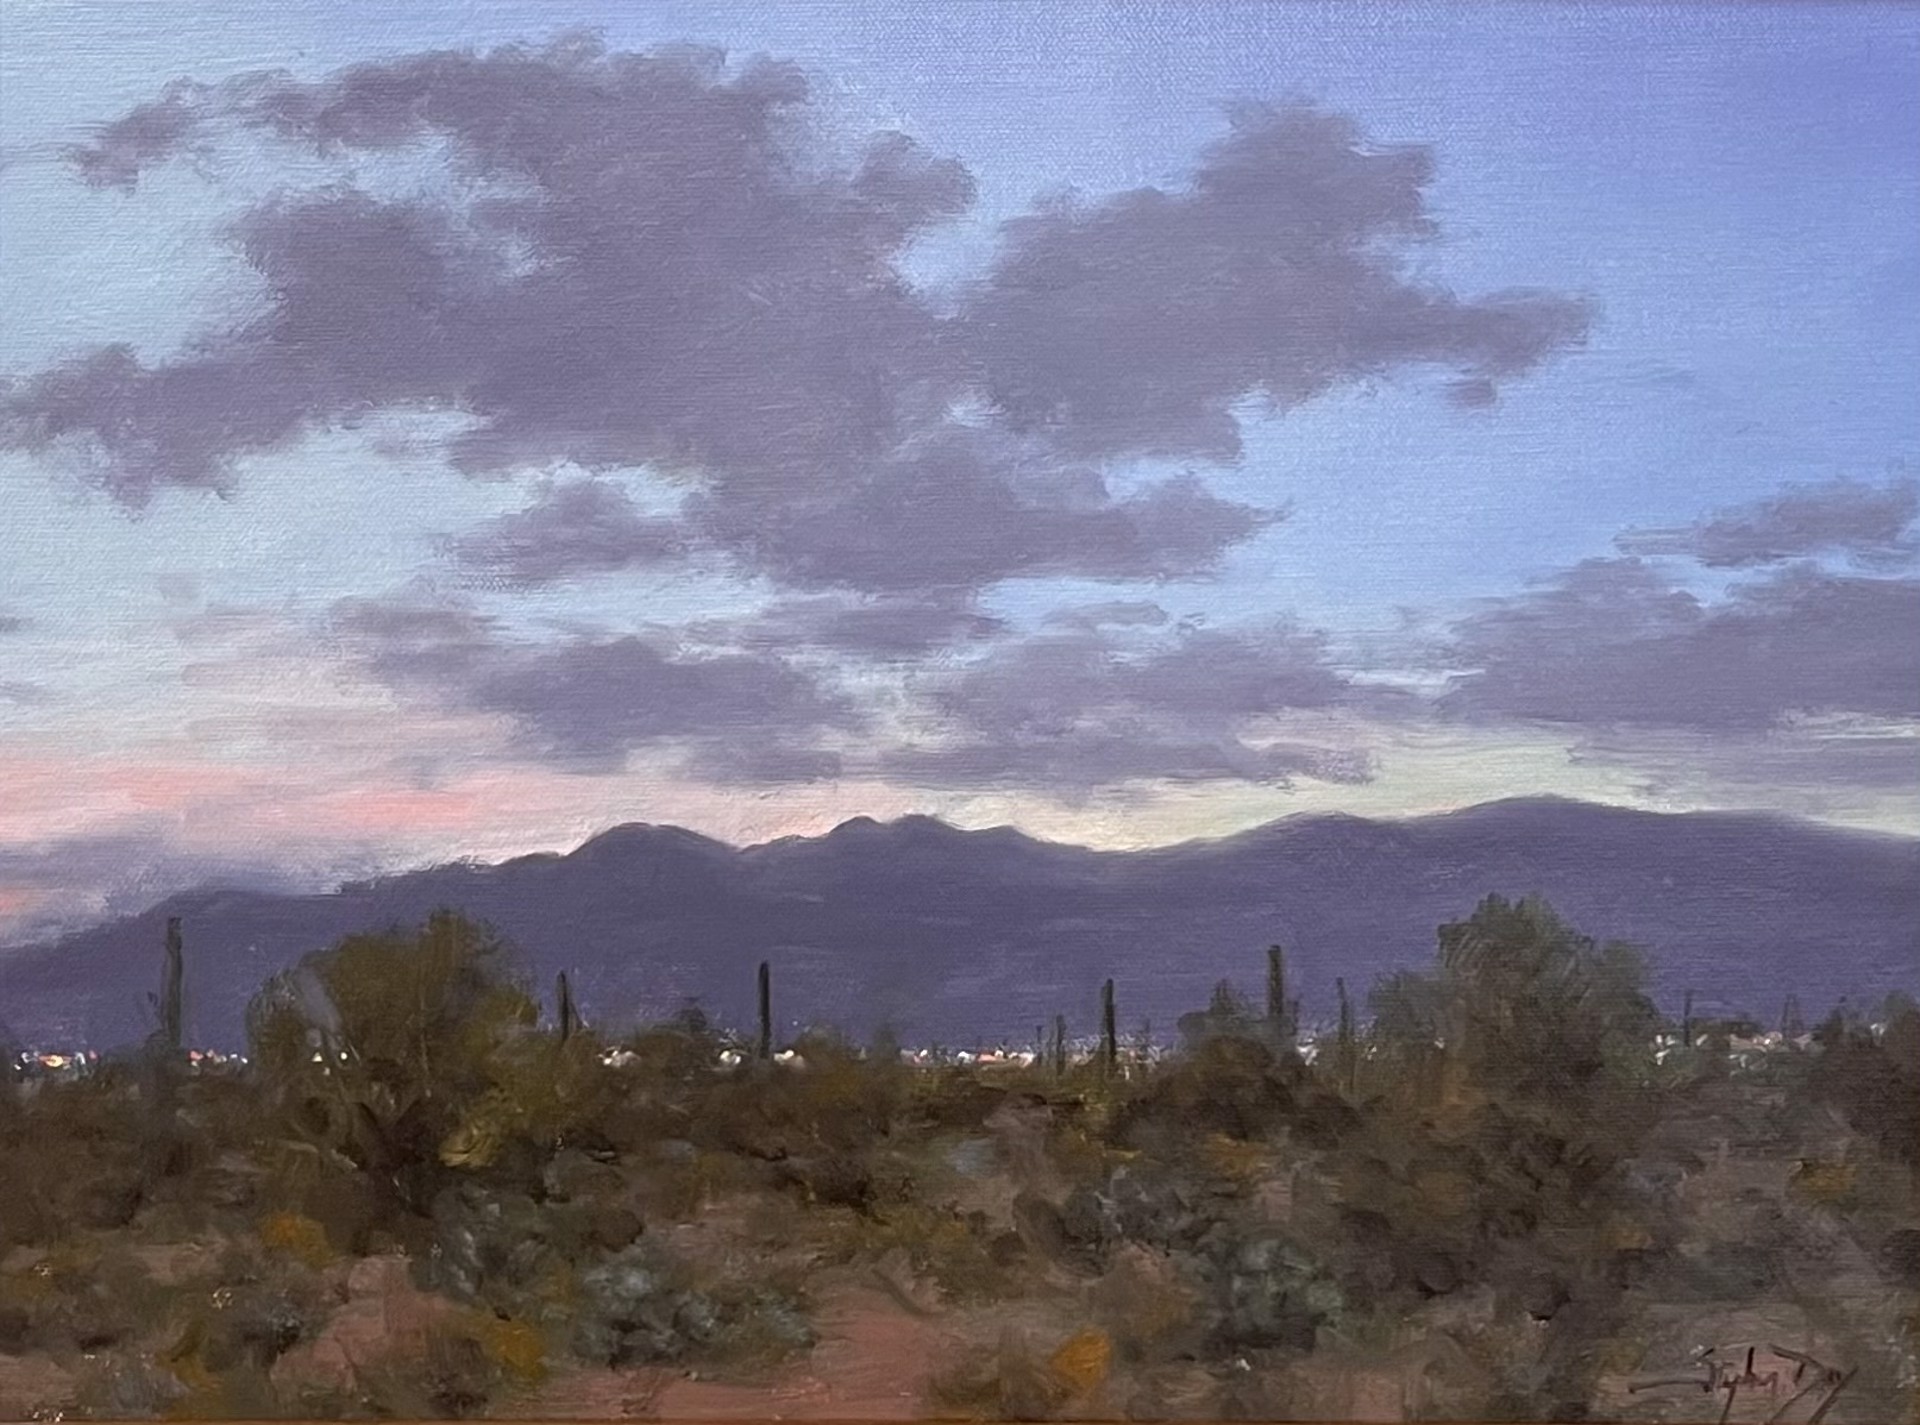 Tucson Twilight by Stephen Day